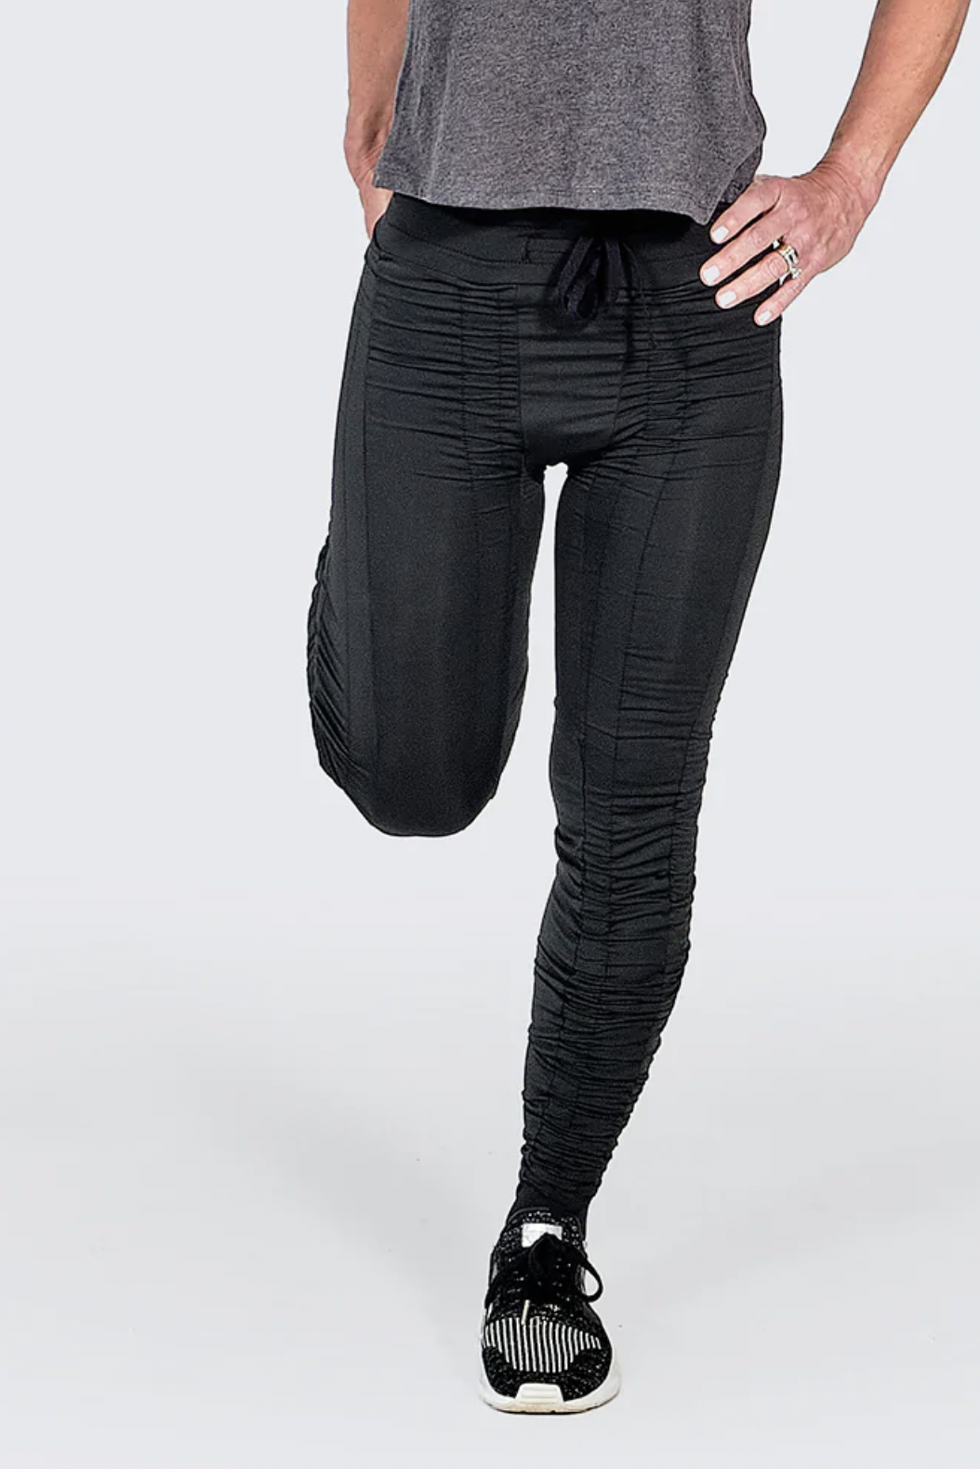 Tall Black Sculpt Luxe High Waisted Gym Ruched Bum Leggings, Black, £23.00